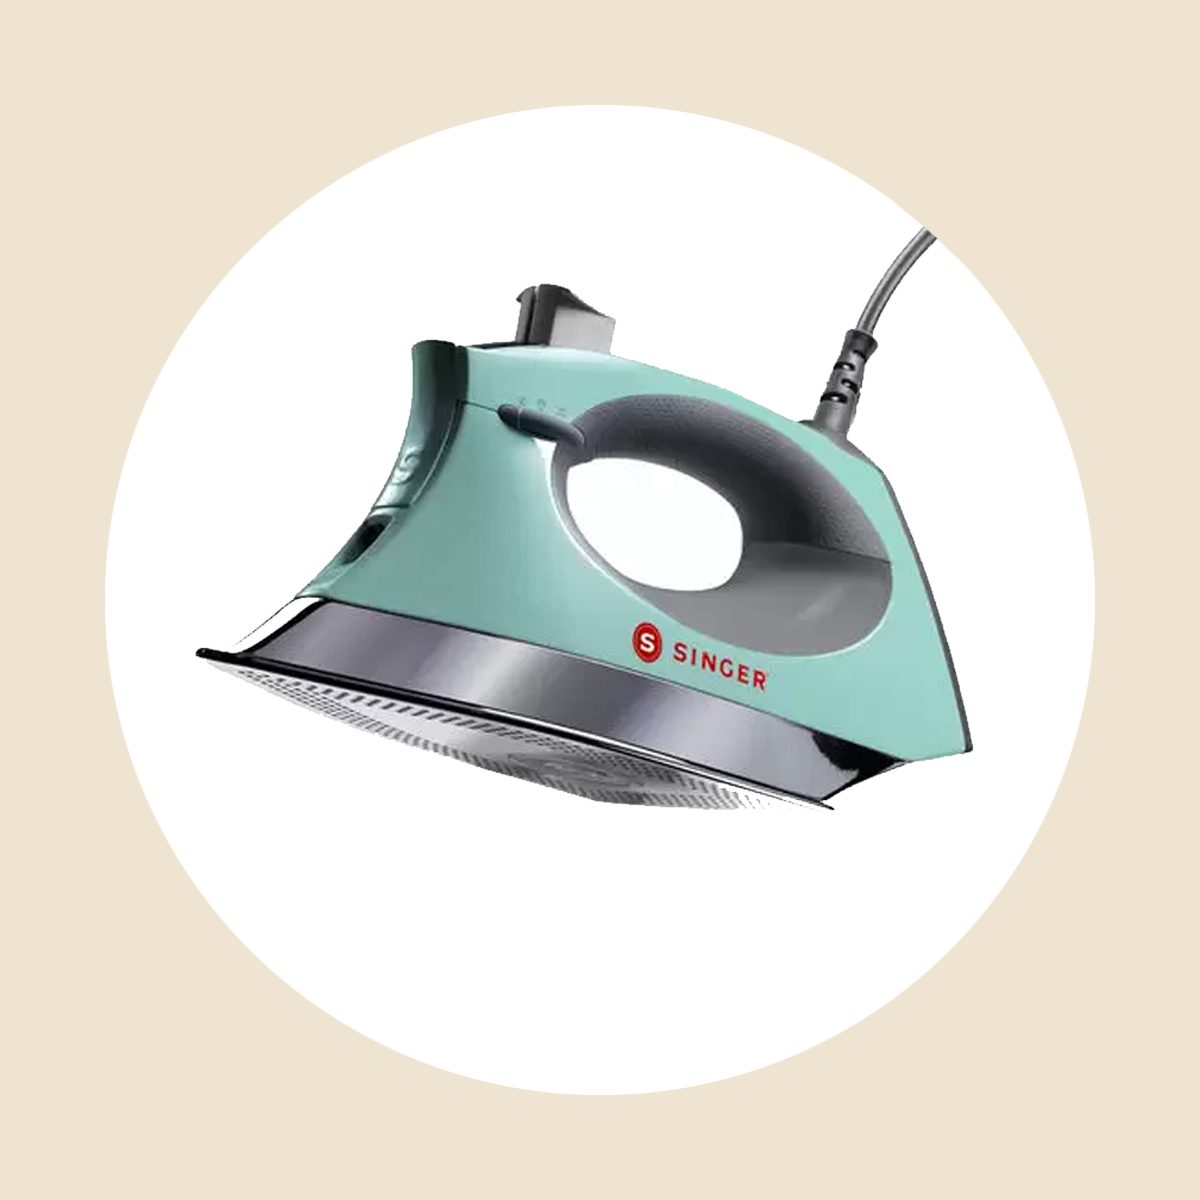 Discover the Best Mini Iron for Sewing, Quilting, and Crafting!